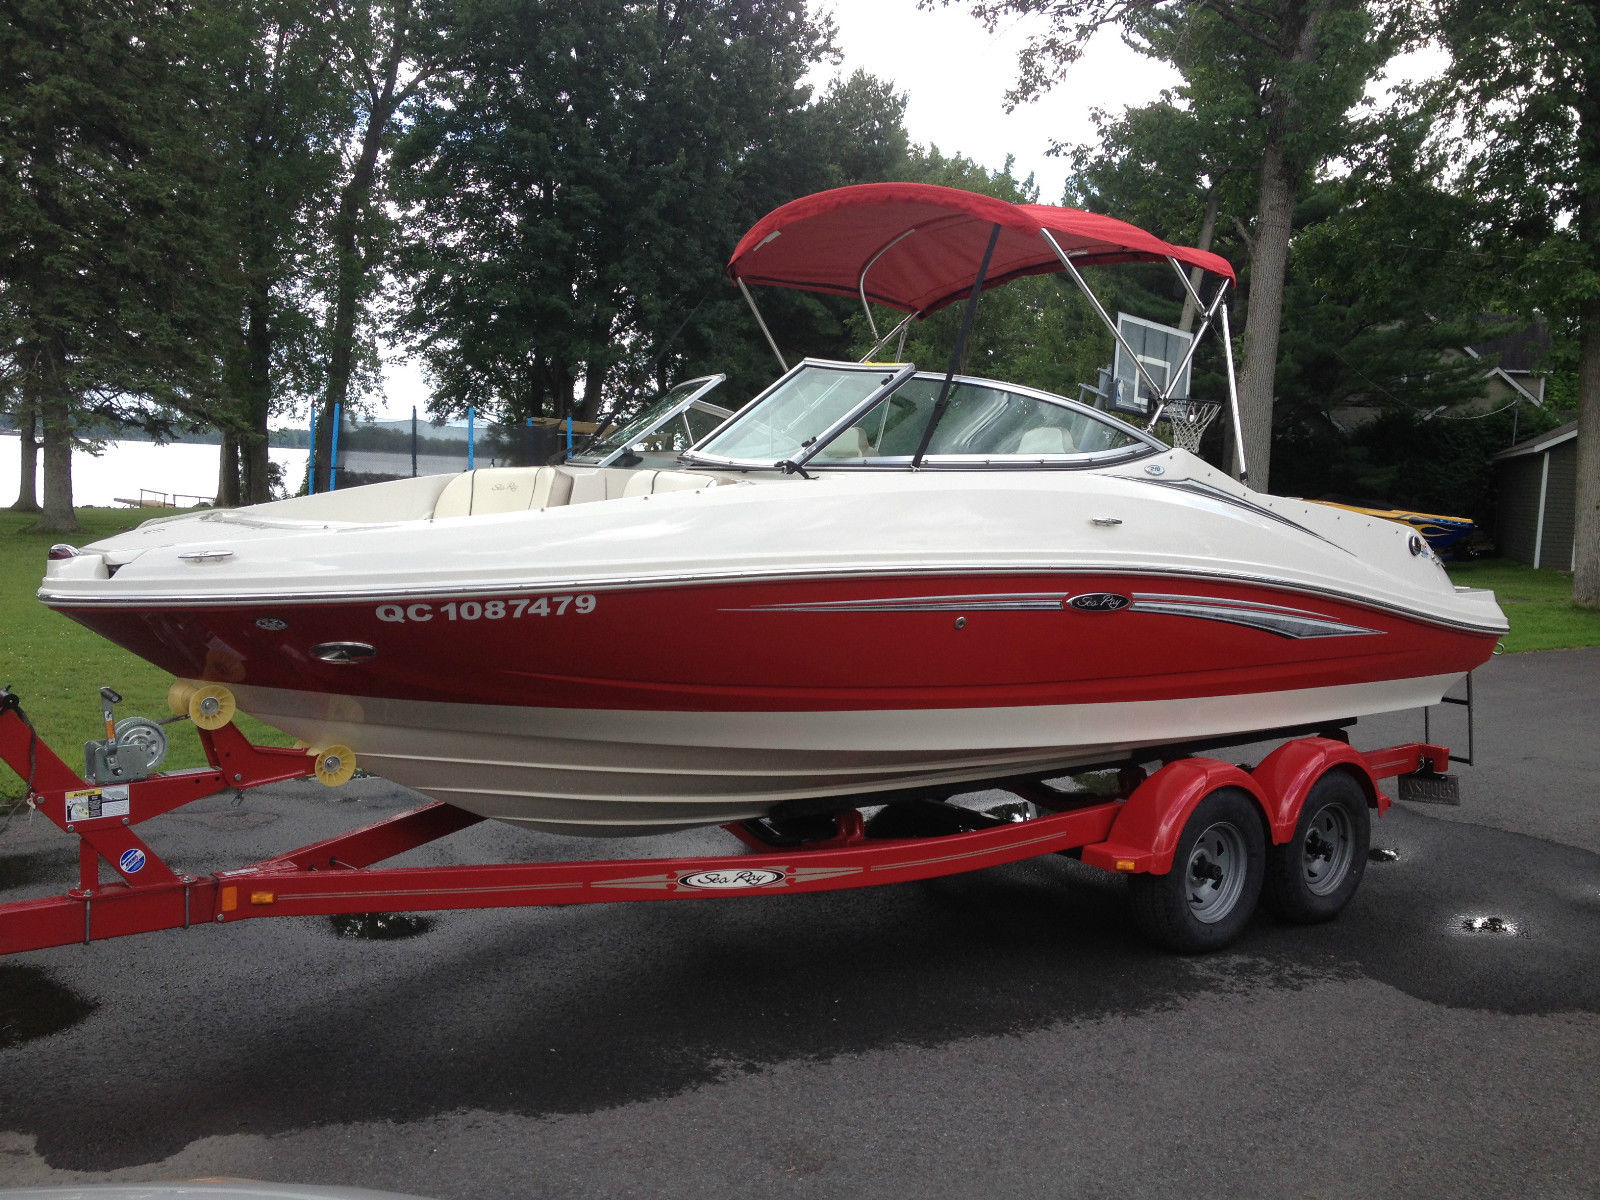 210 Searay Select 2007 With 350 Magnum MPI 300HP In Excellent Condition